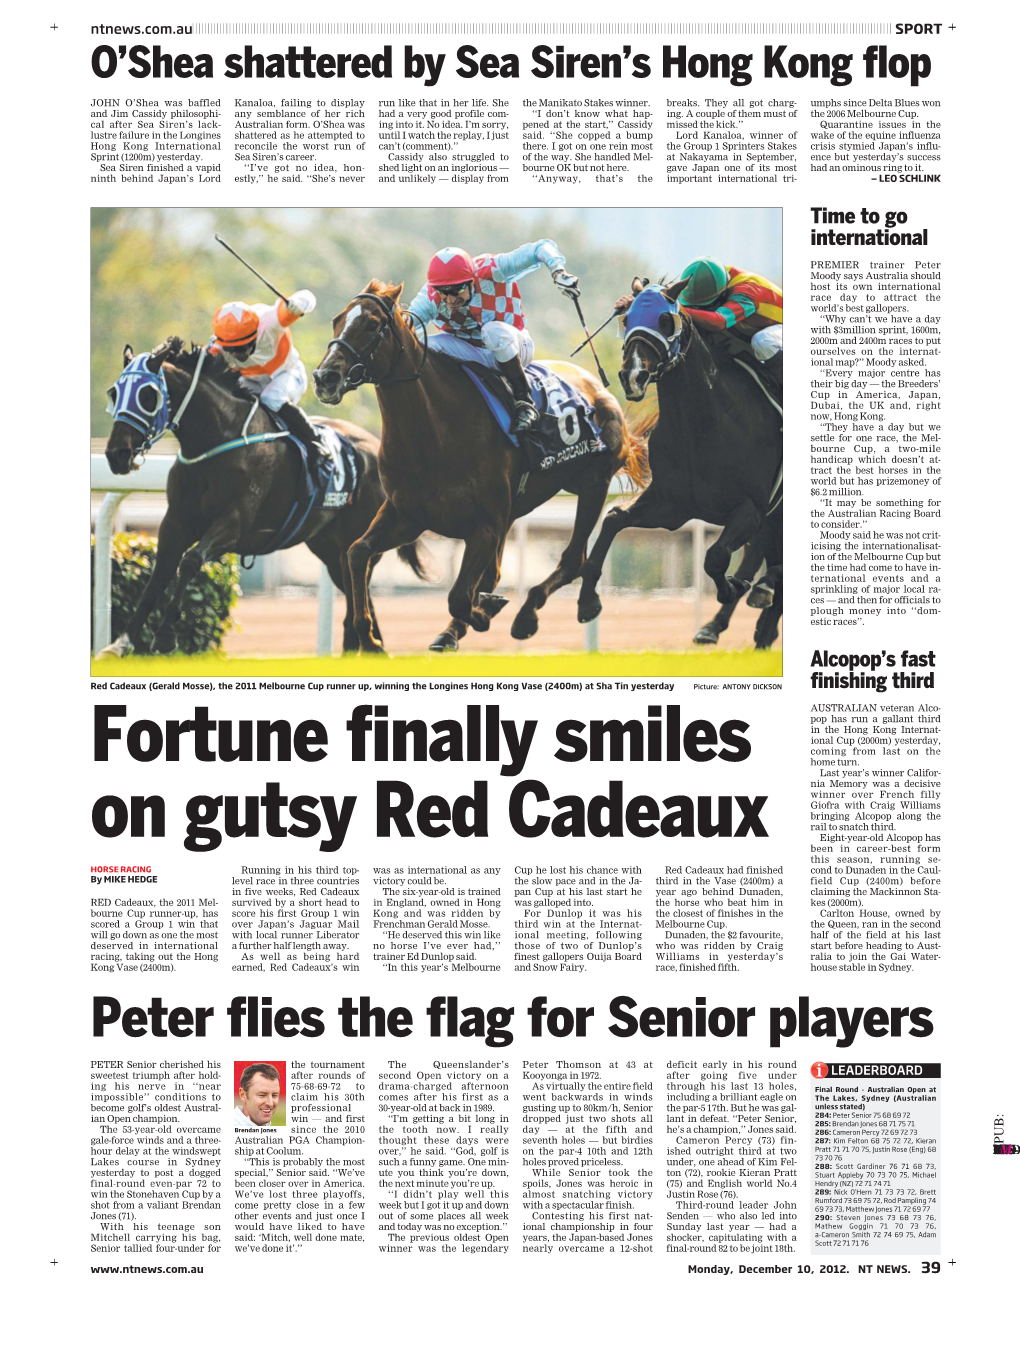 Fortune Finally Smiles on Gutsy Red Cadeaux